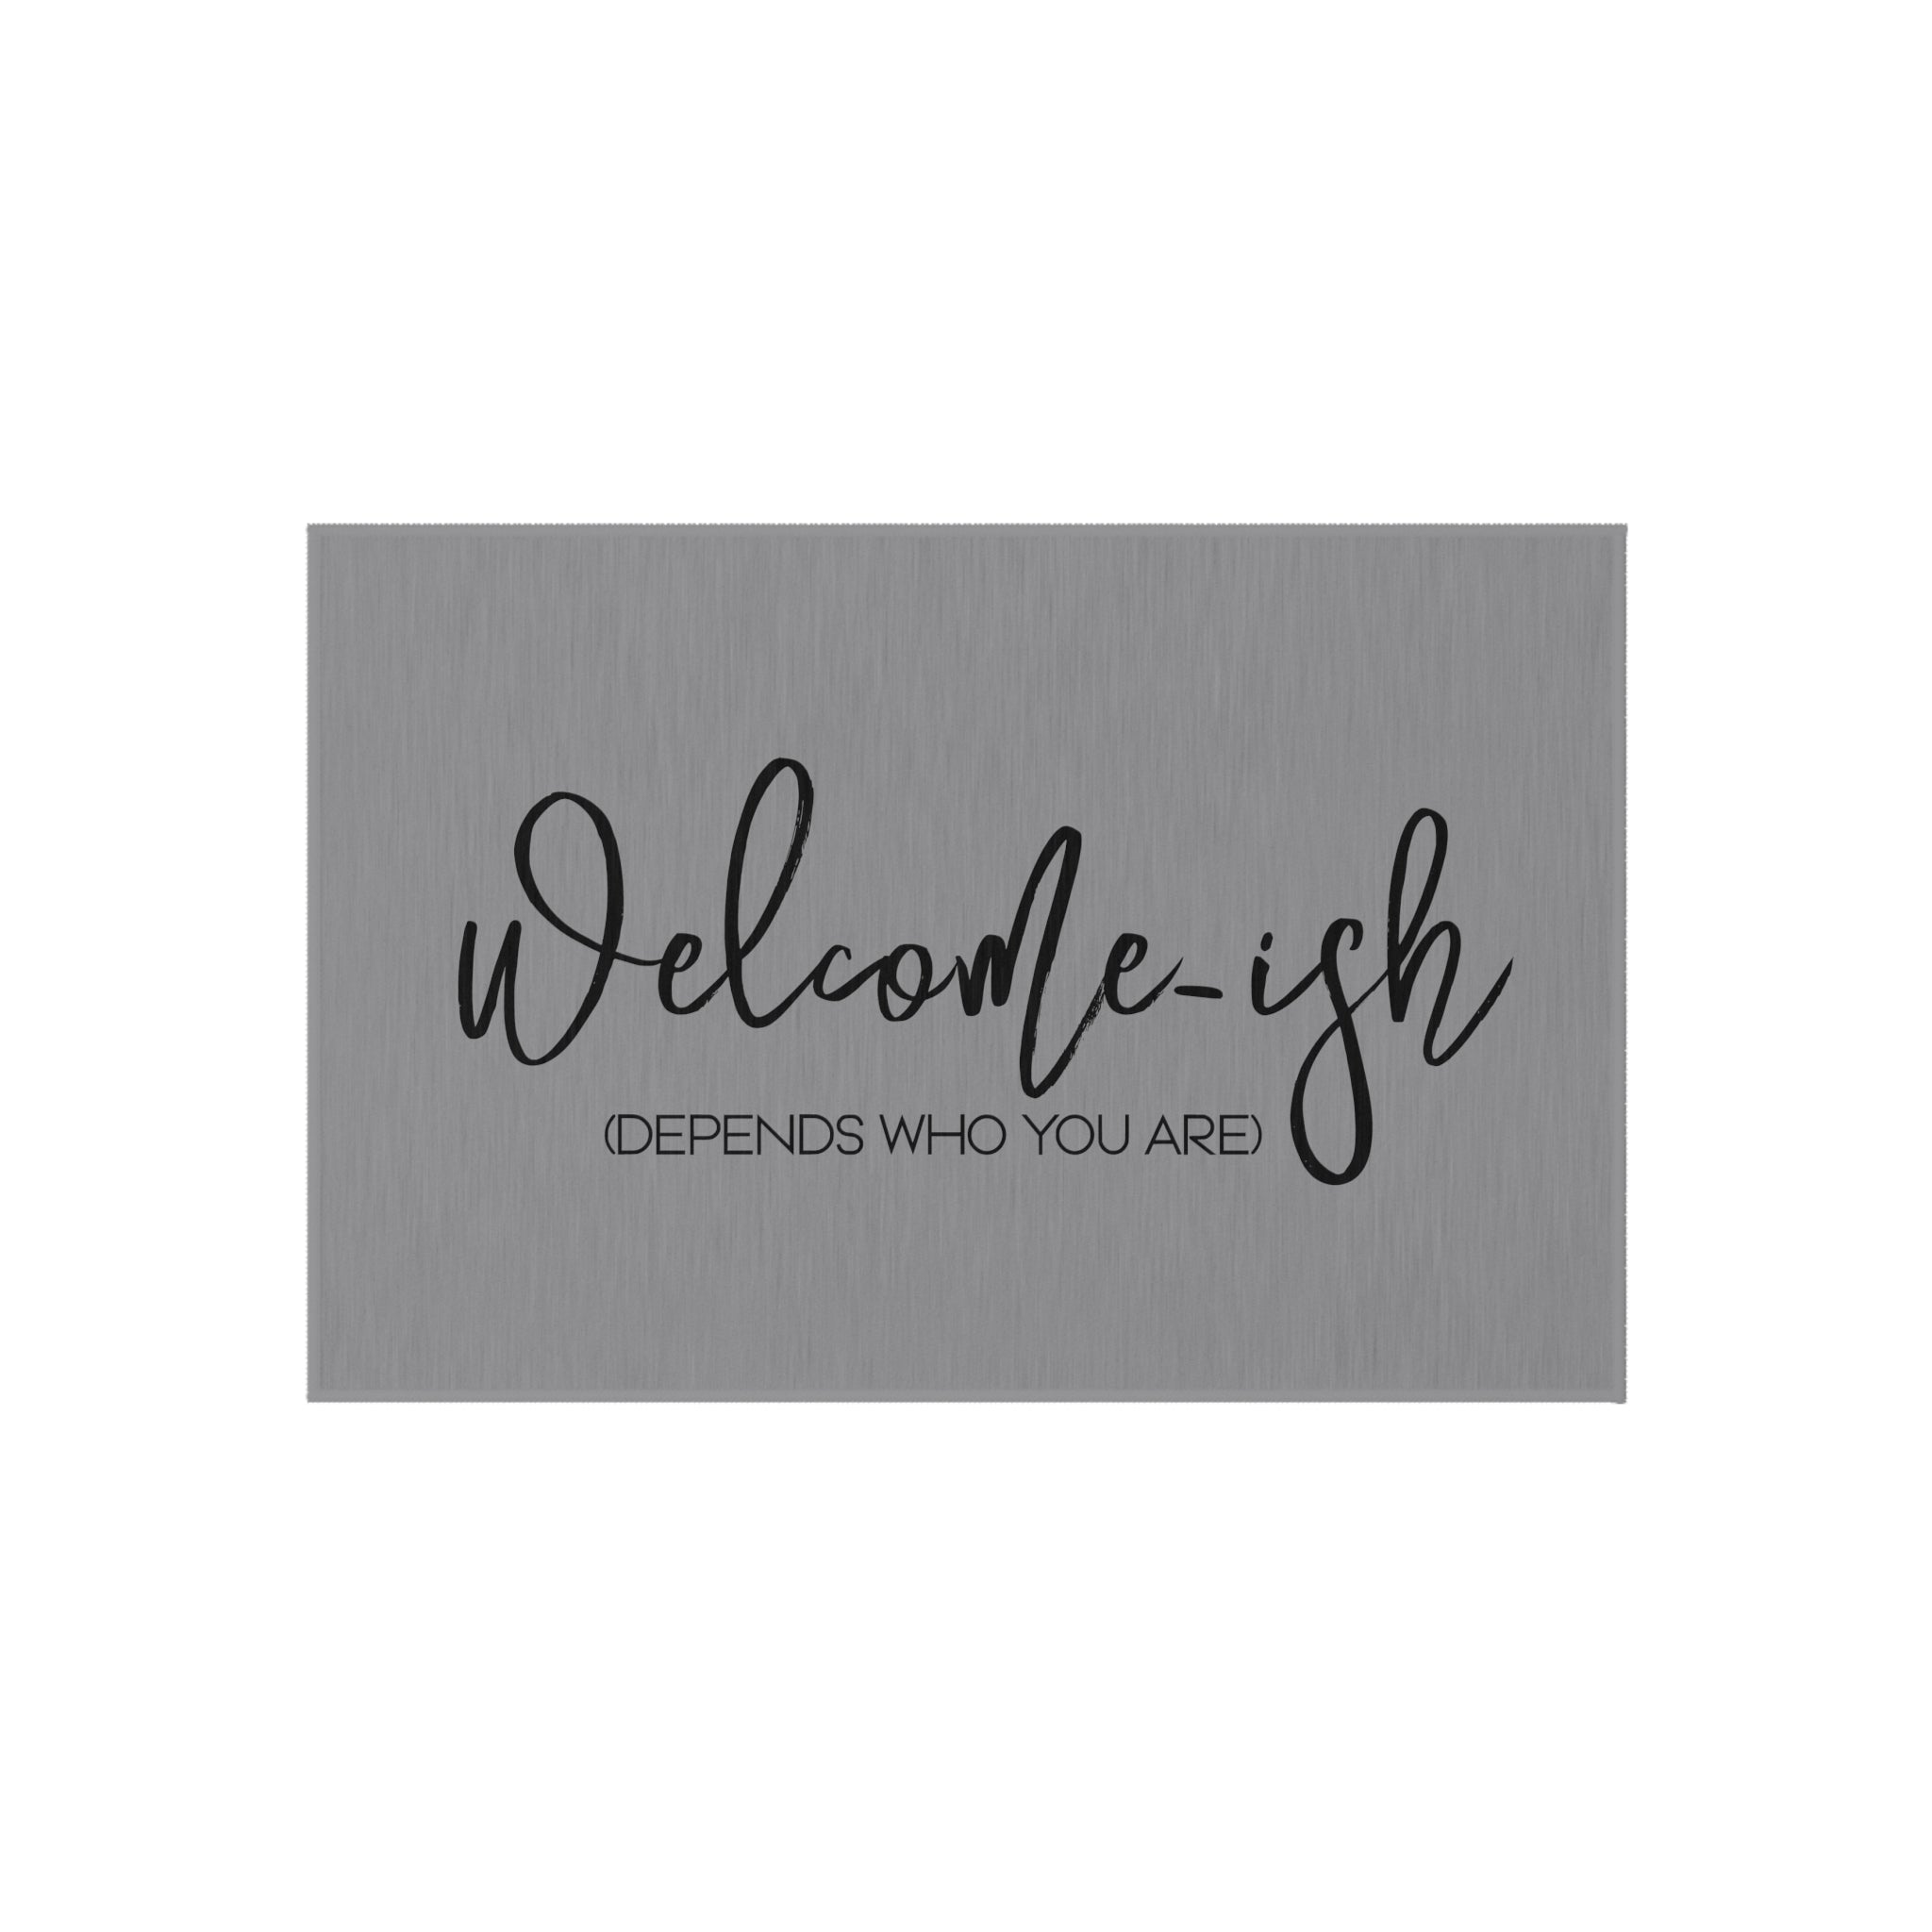 Welcome-ish (Depends who you are) Funny Sarcastic Welcome Mat (Grey), Outdoor Mat for Front Door, Housewarming Gift, Dornier Rug,